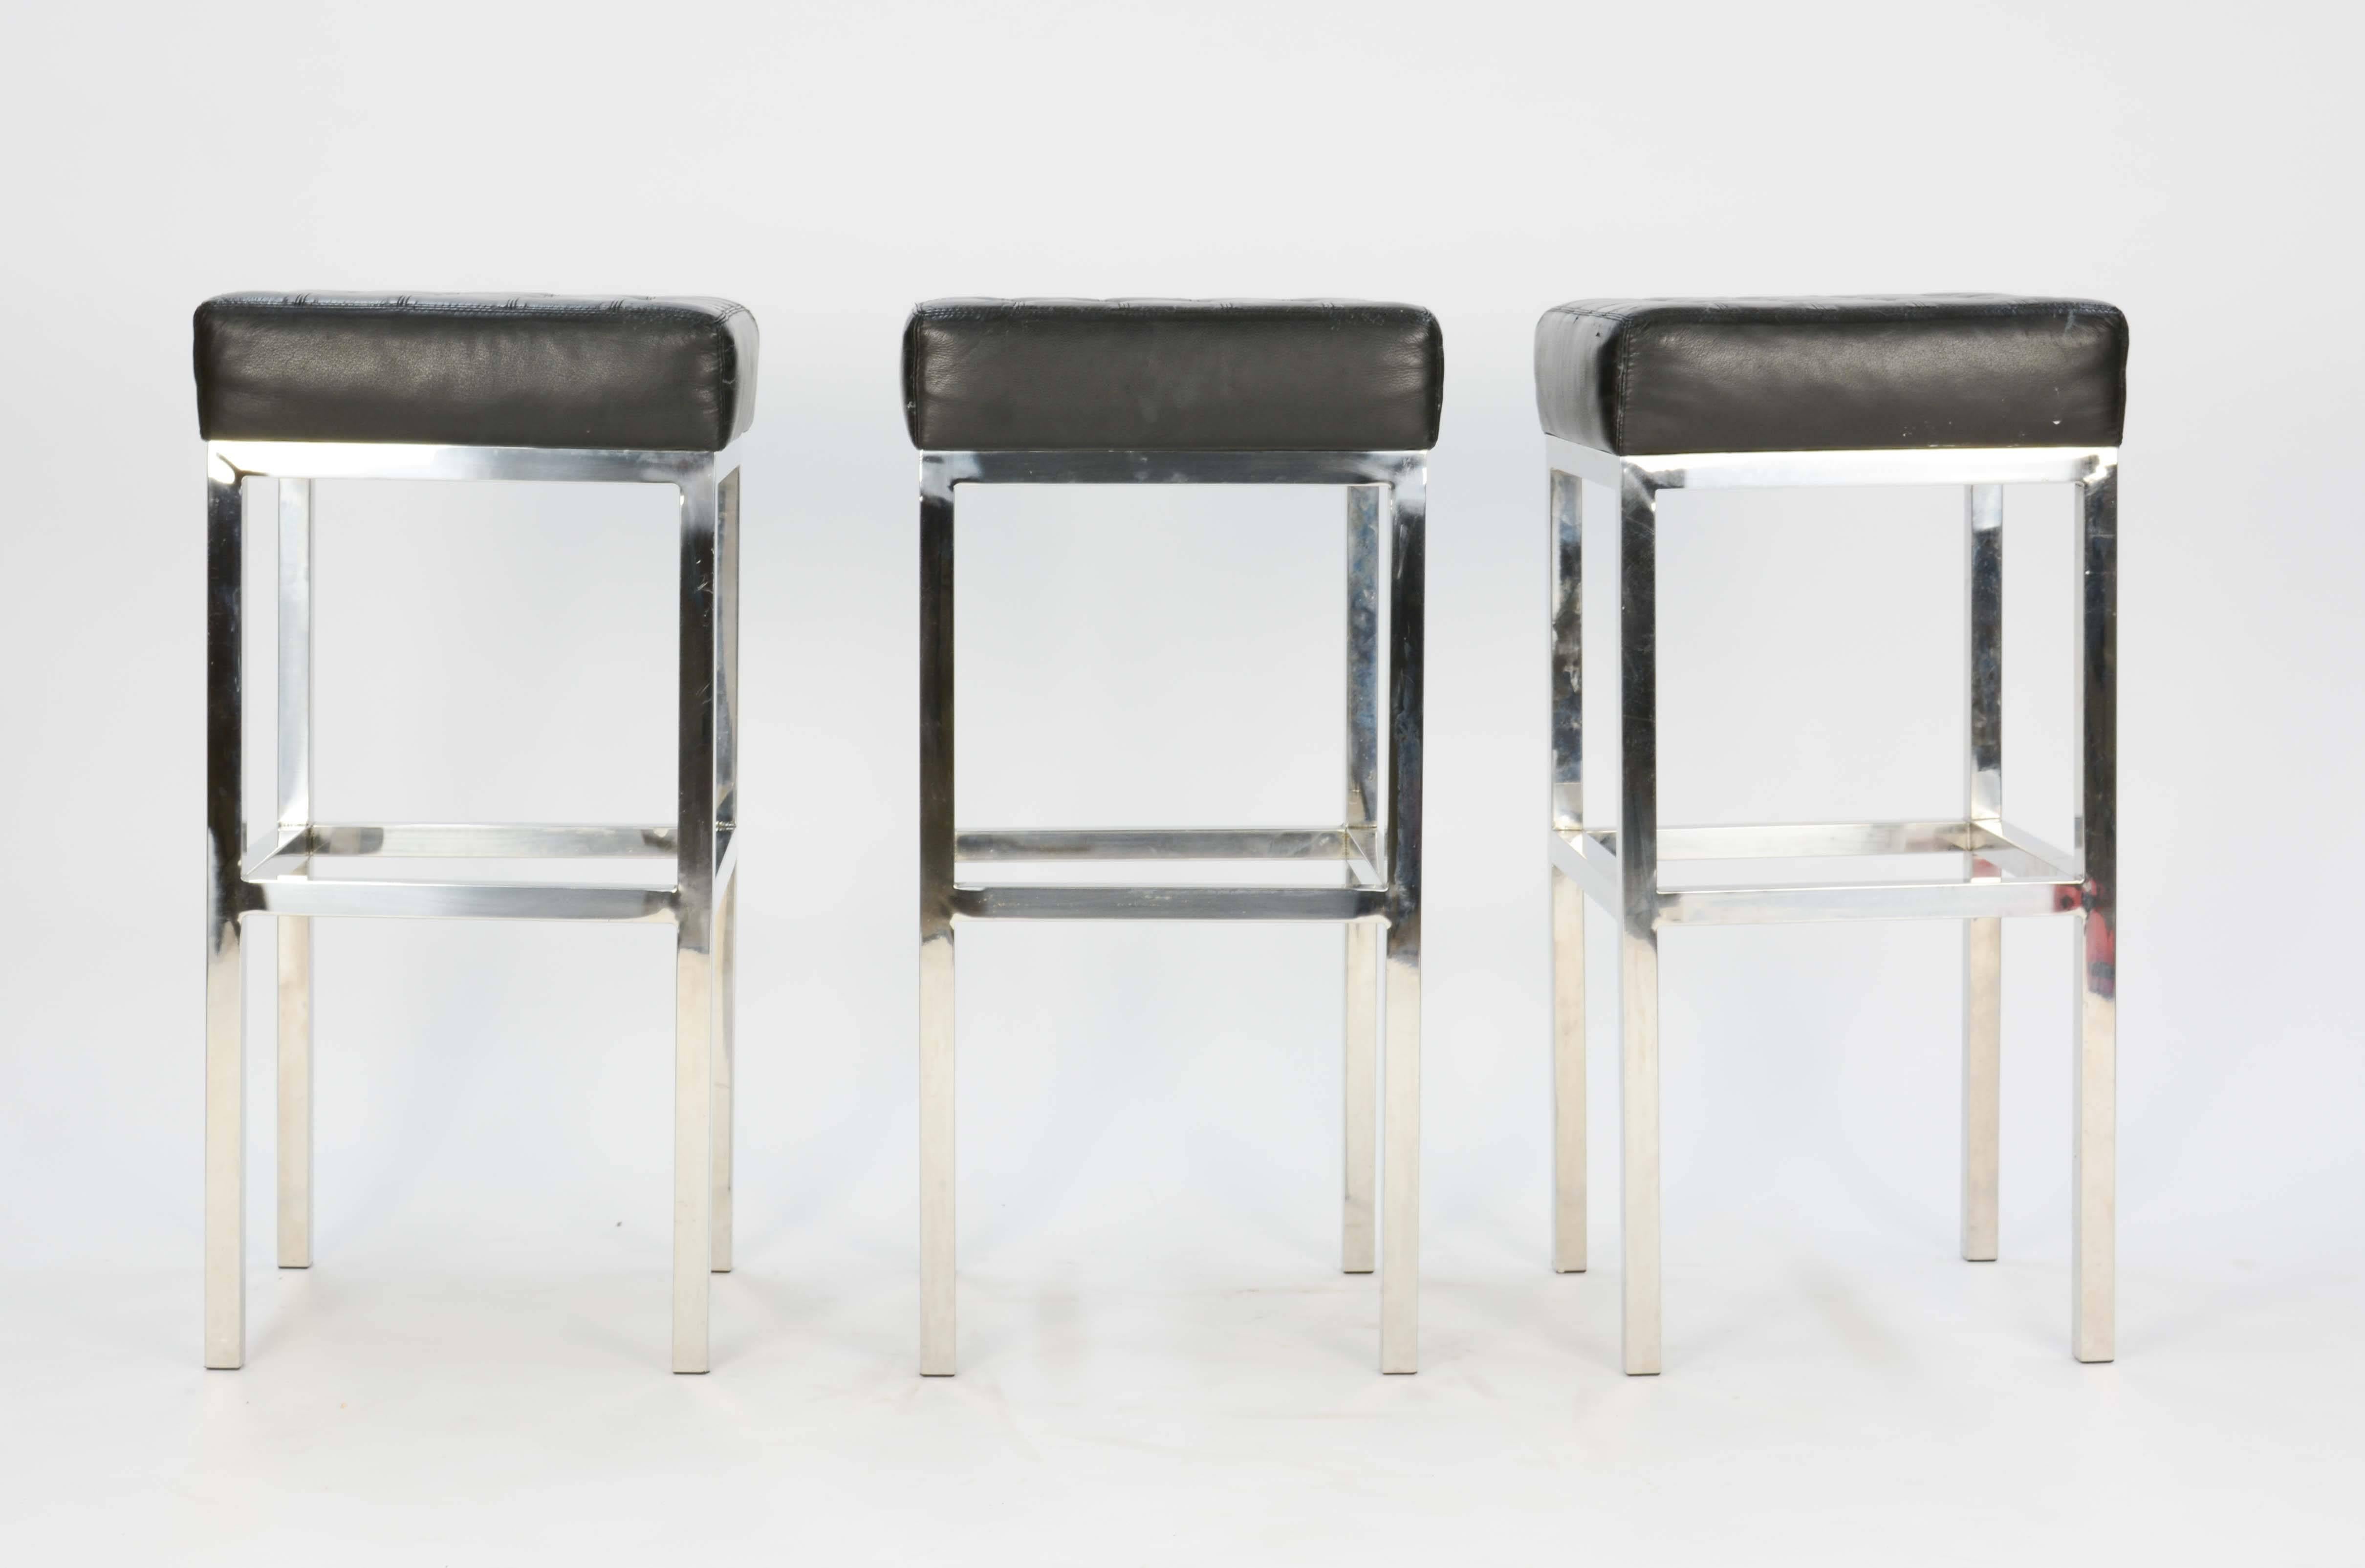 Excellent and comfortable bar or counter stools in the manner of Mies Van Der Rohe. They are sound and solid stools with the tuffed leather patterning of Mies' work for knoll.